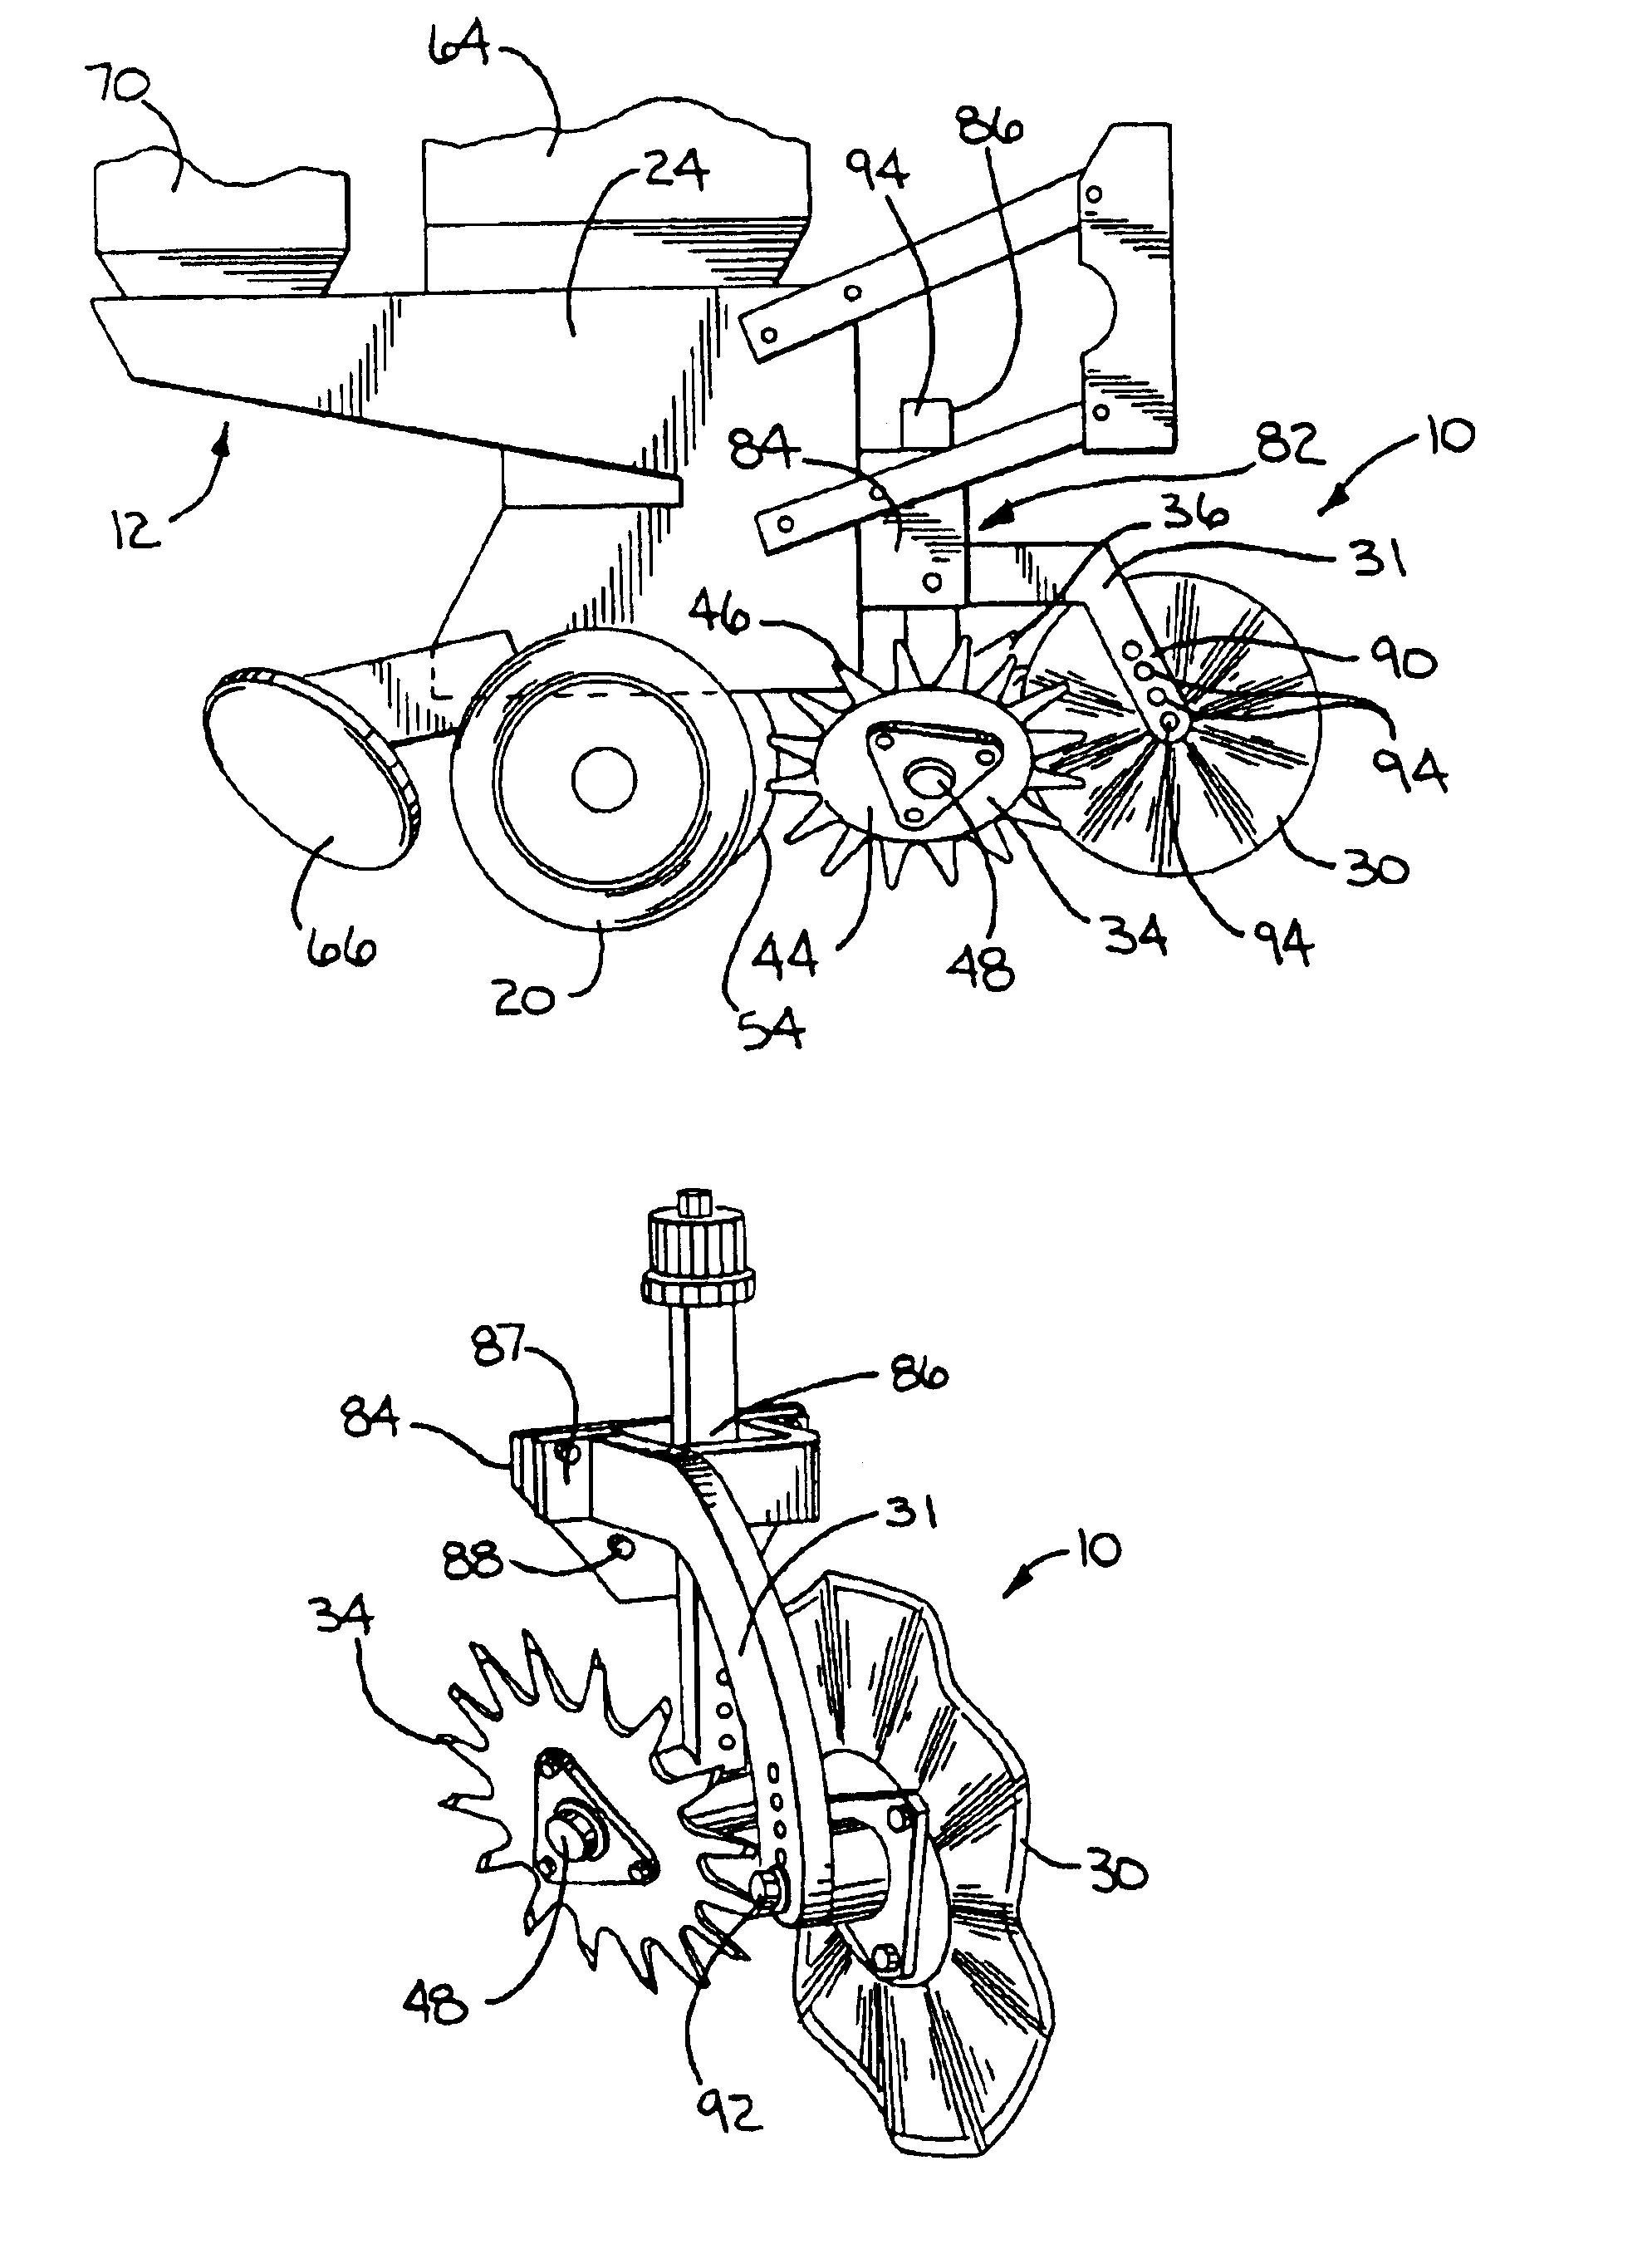 Apparatus for preparing soil for the placement of seed and additive